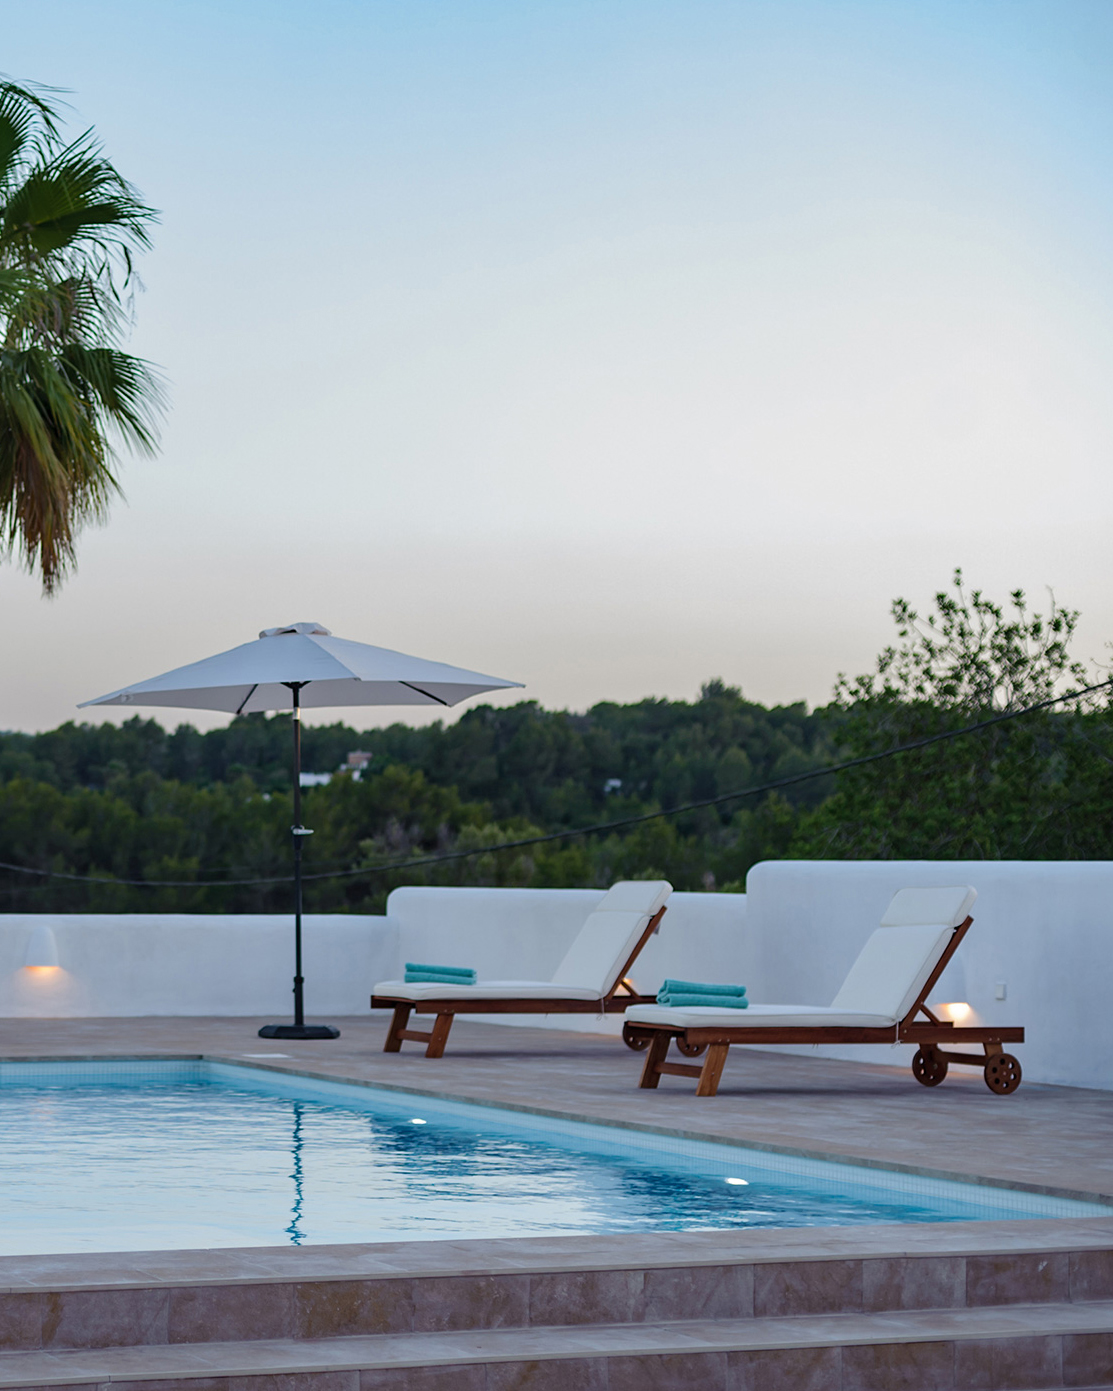 Pool furniture and the greenery of the local area surrounding a luxury holiday home in Ibiza